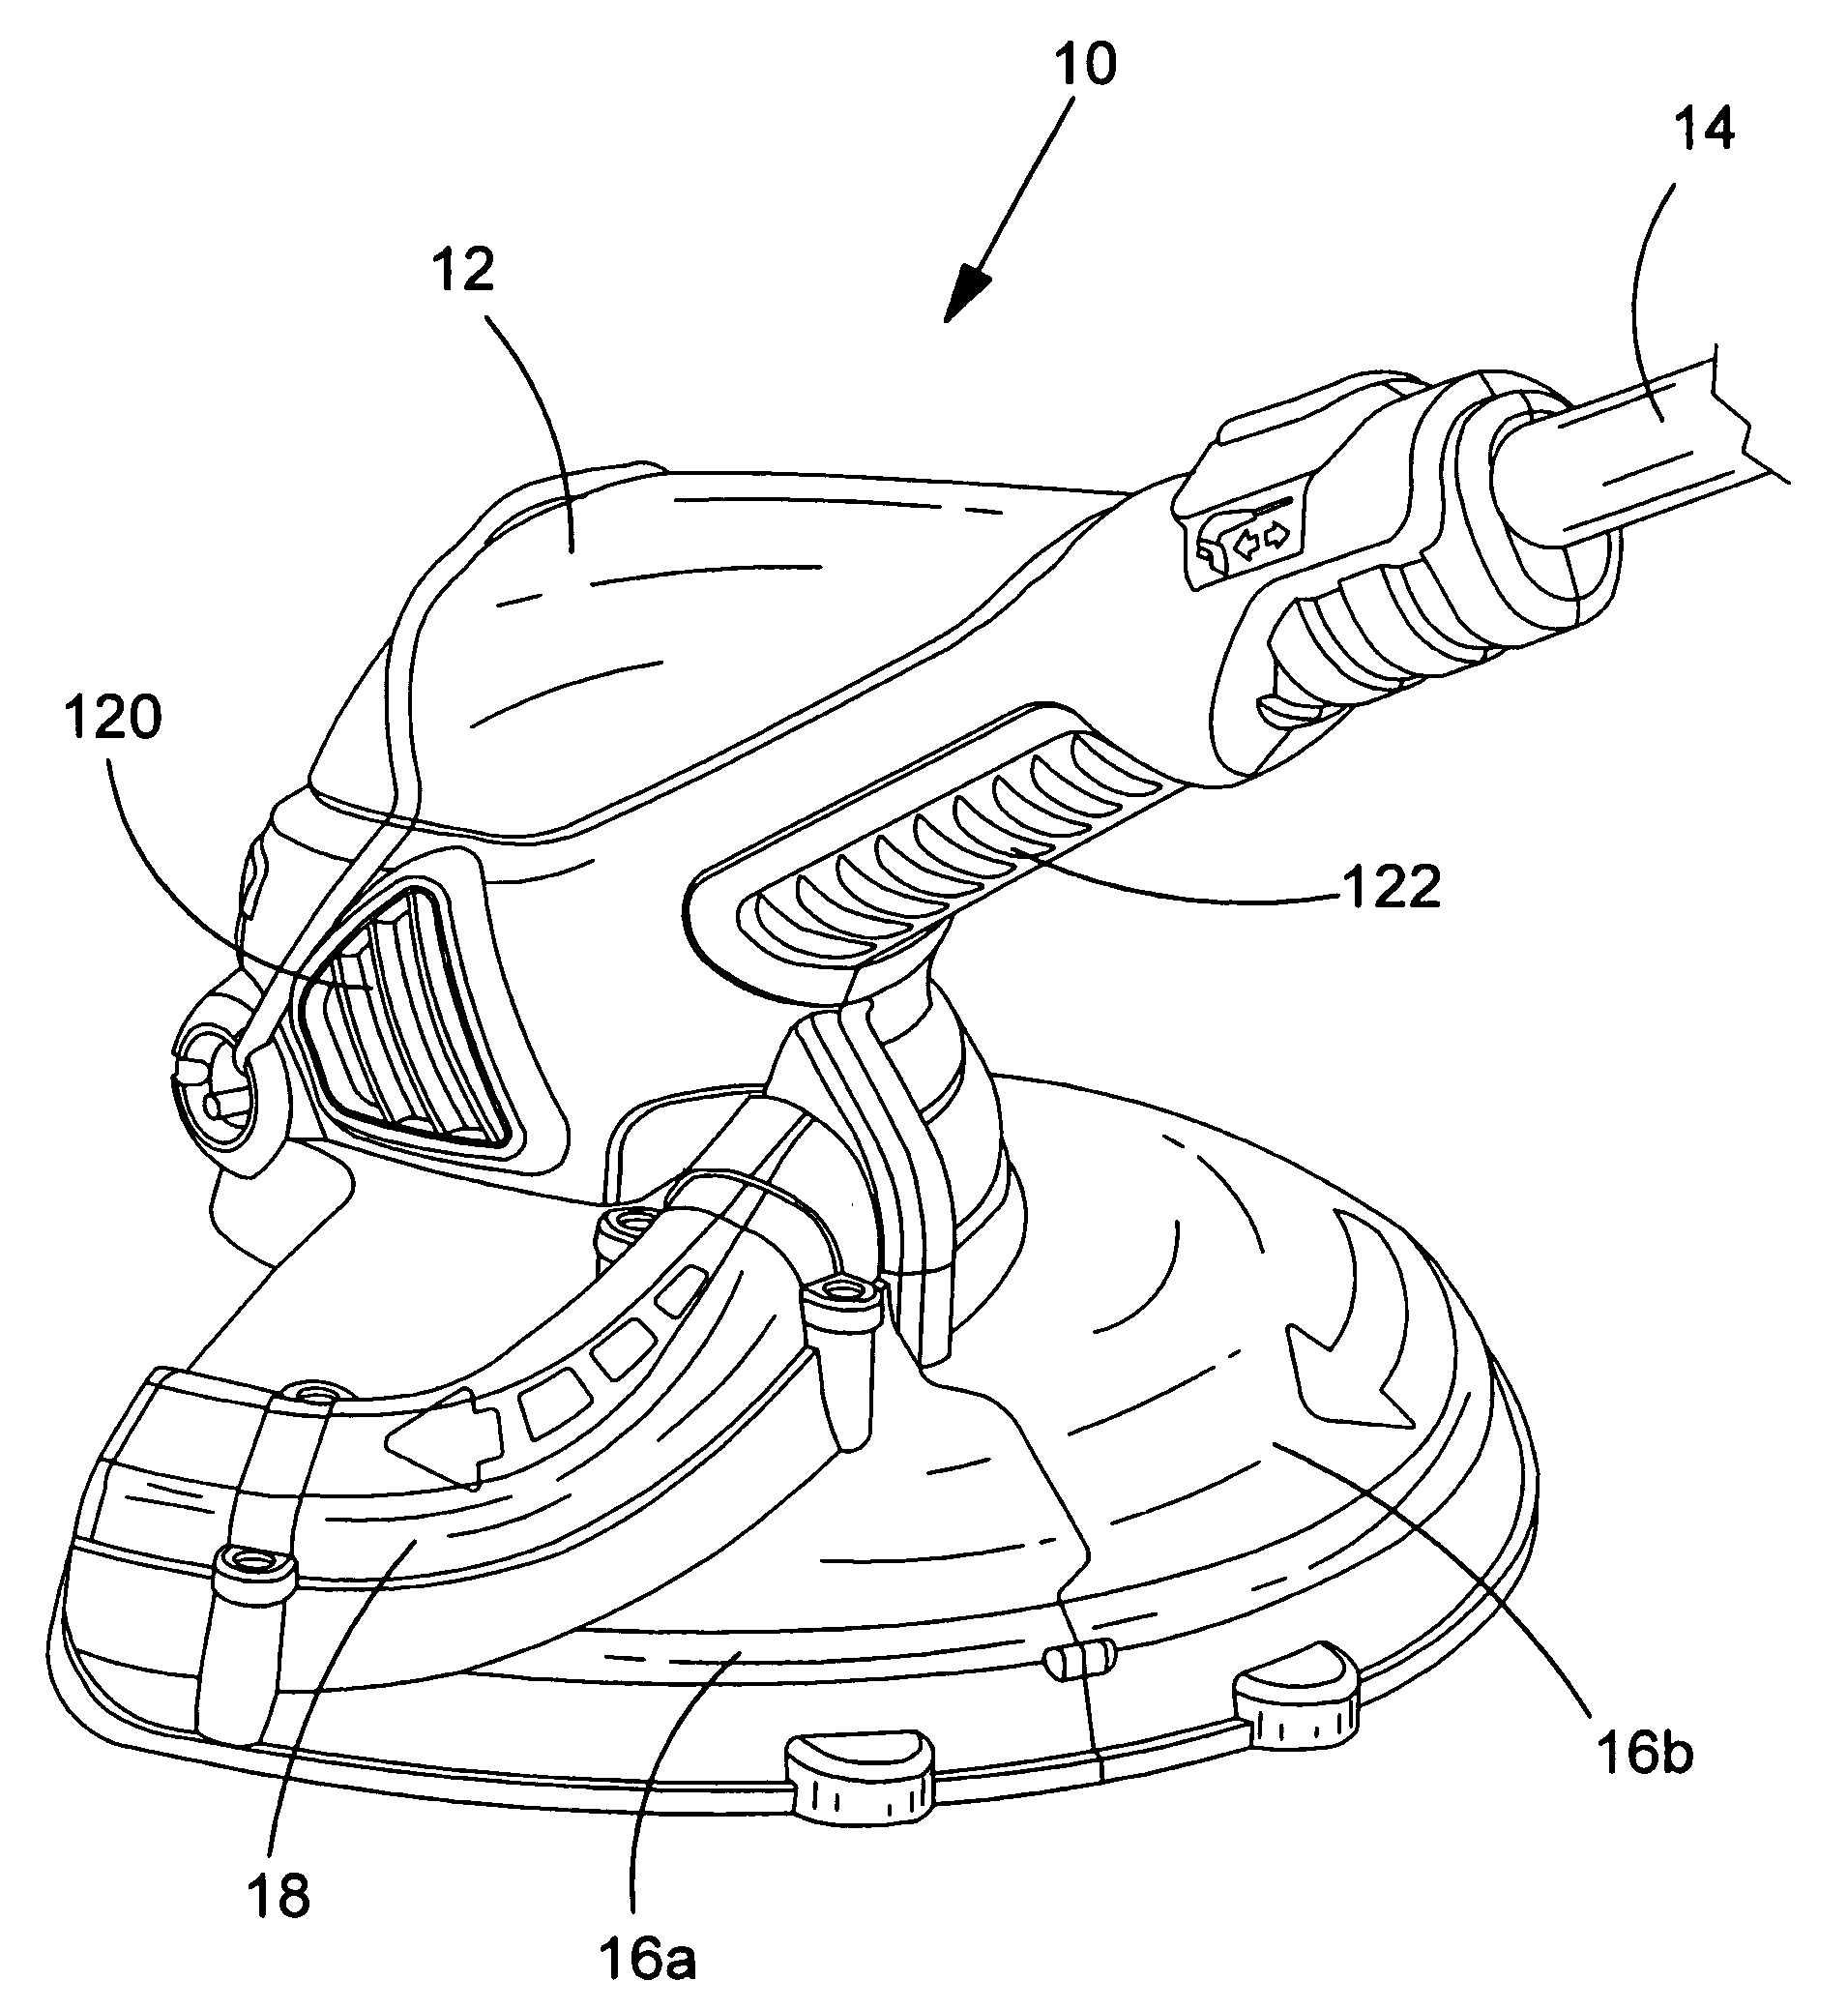 Vegetation trimmer having a blowing function